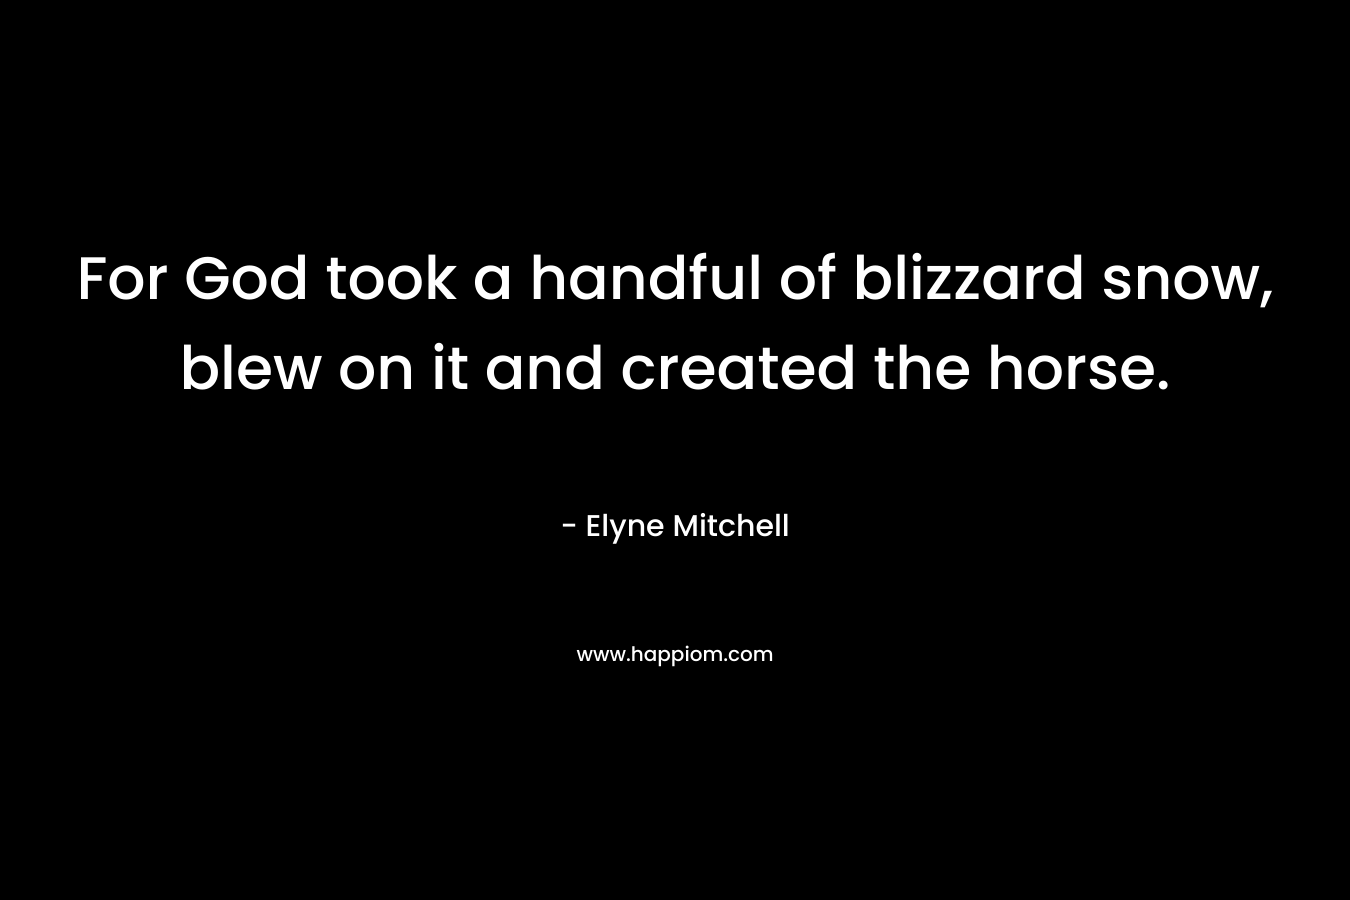 For God took a handful of blizzard snow, blew on it and created the horse. – Elyne Mitchell